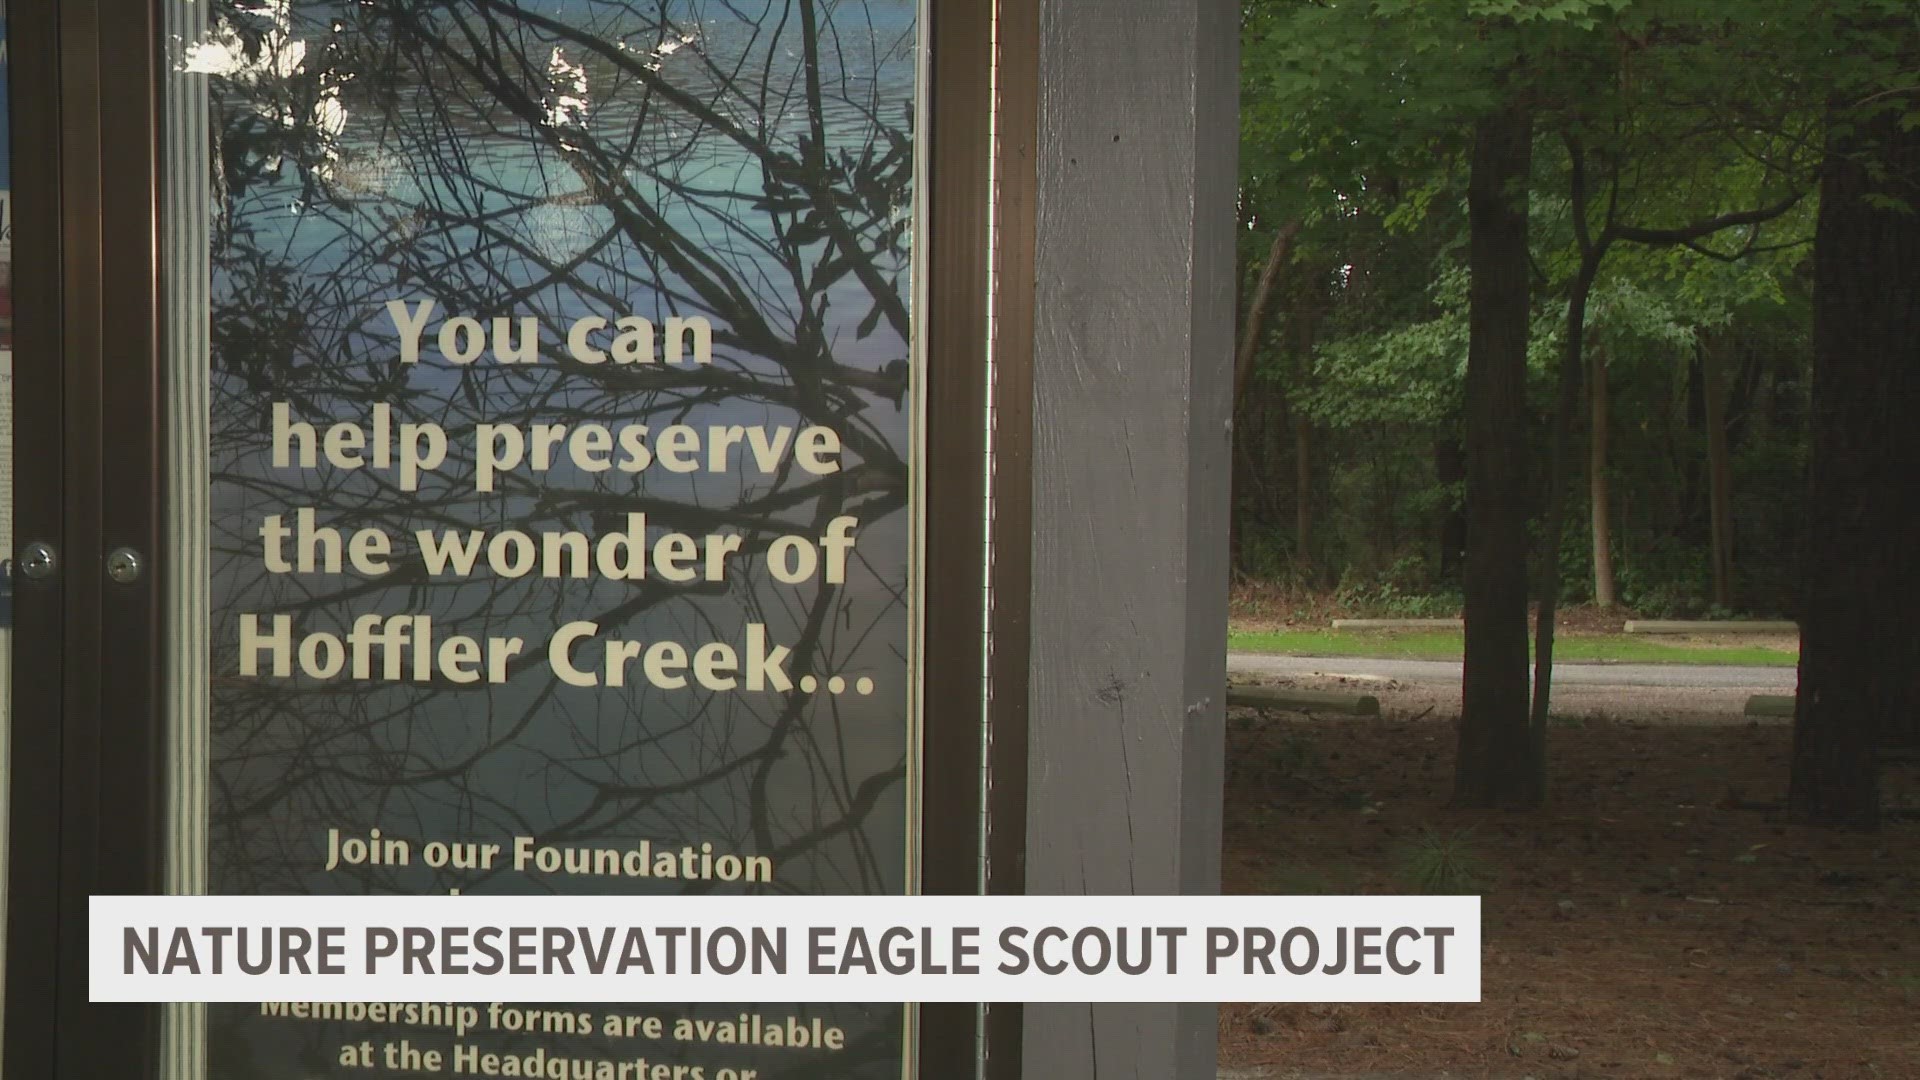 The 15-year-old is on her way to becoming an Eagle Scout. But first, she must complete her Eagle Scout project.